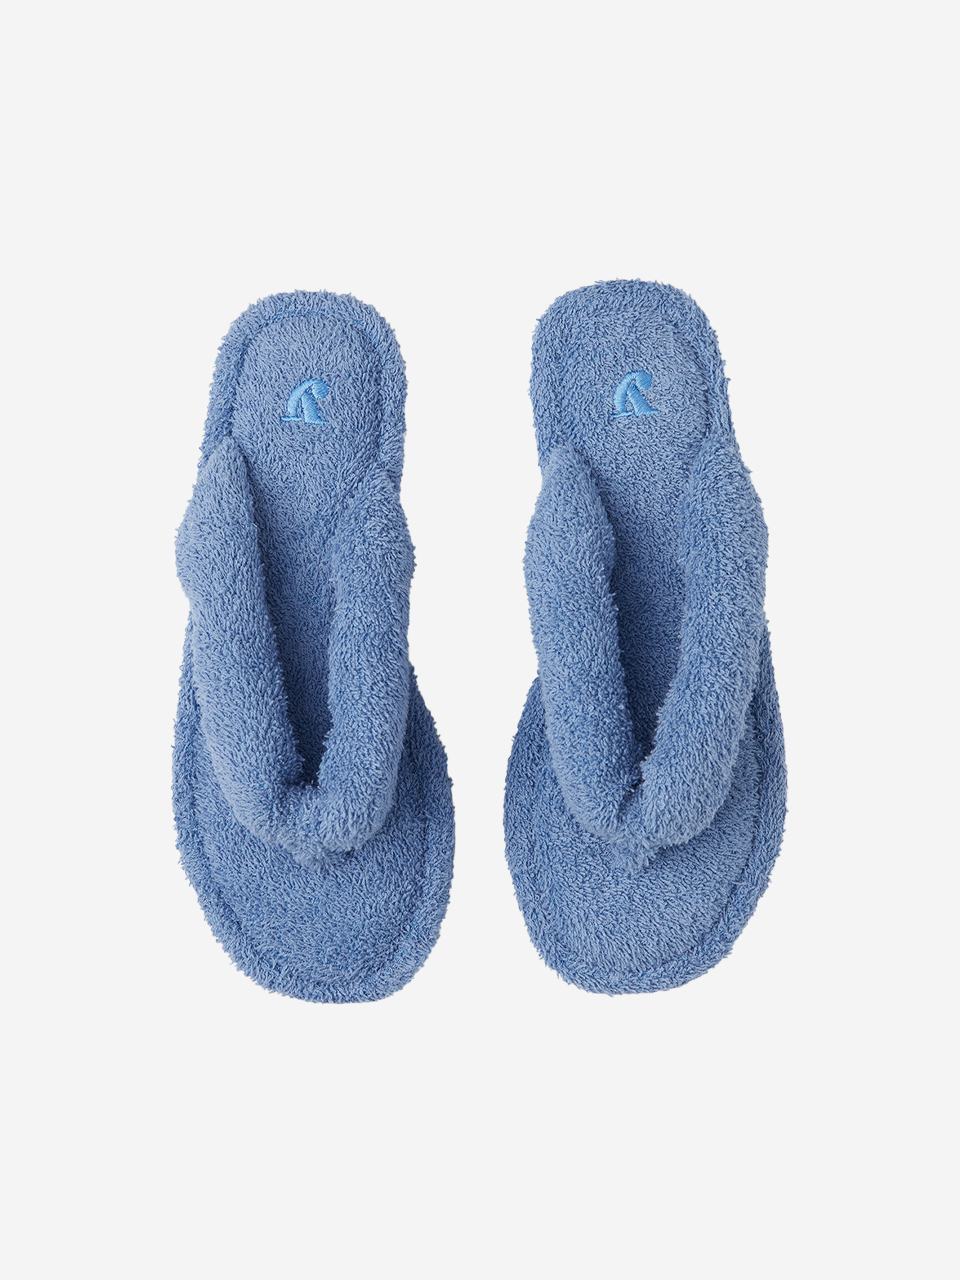 easygoing slippers (terry 4colors)